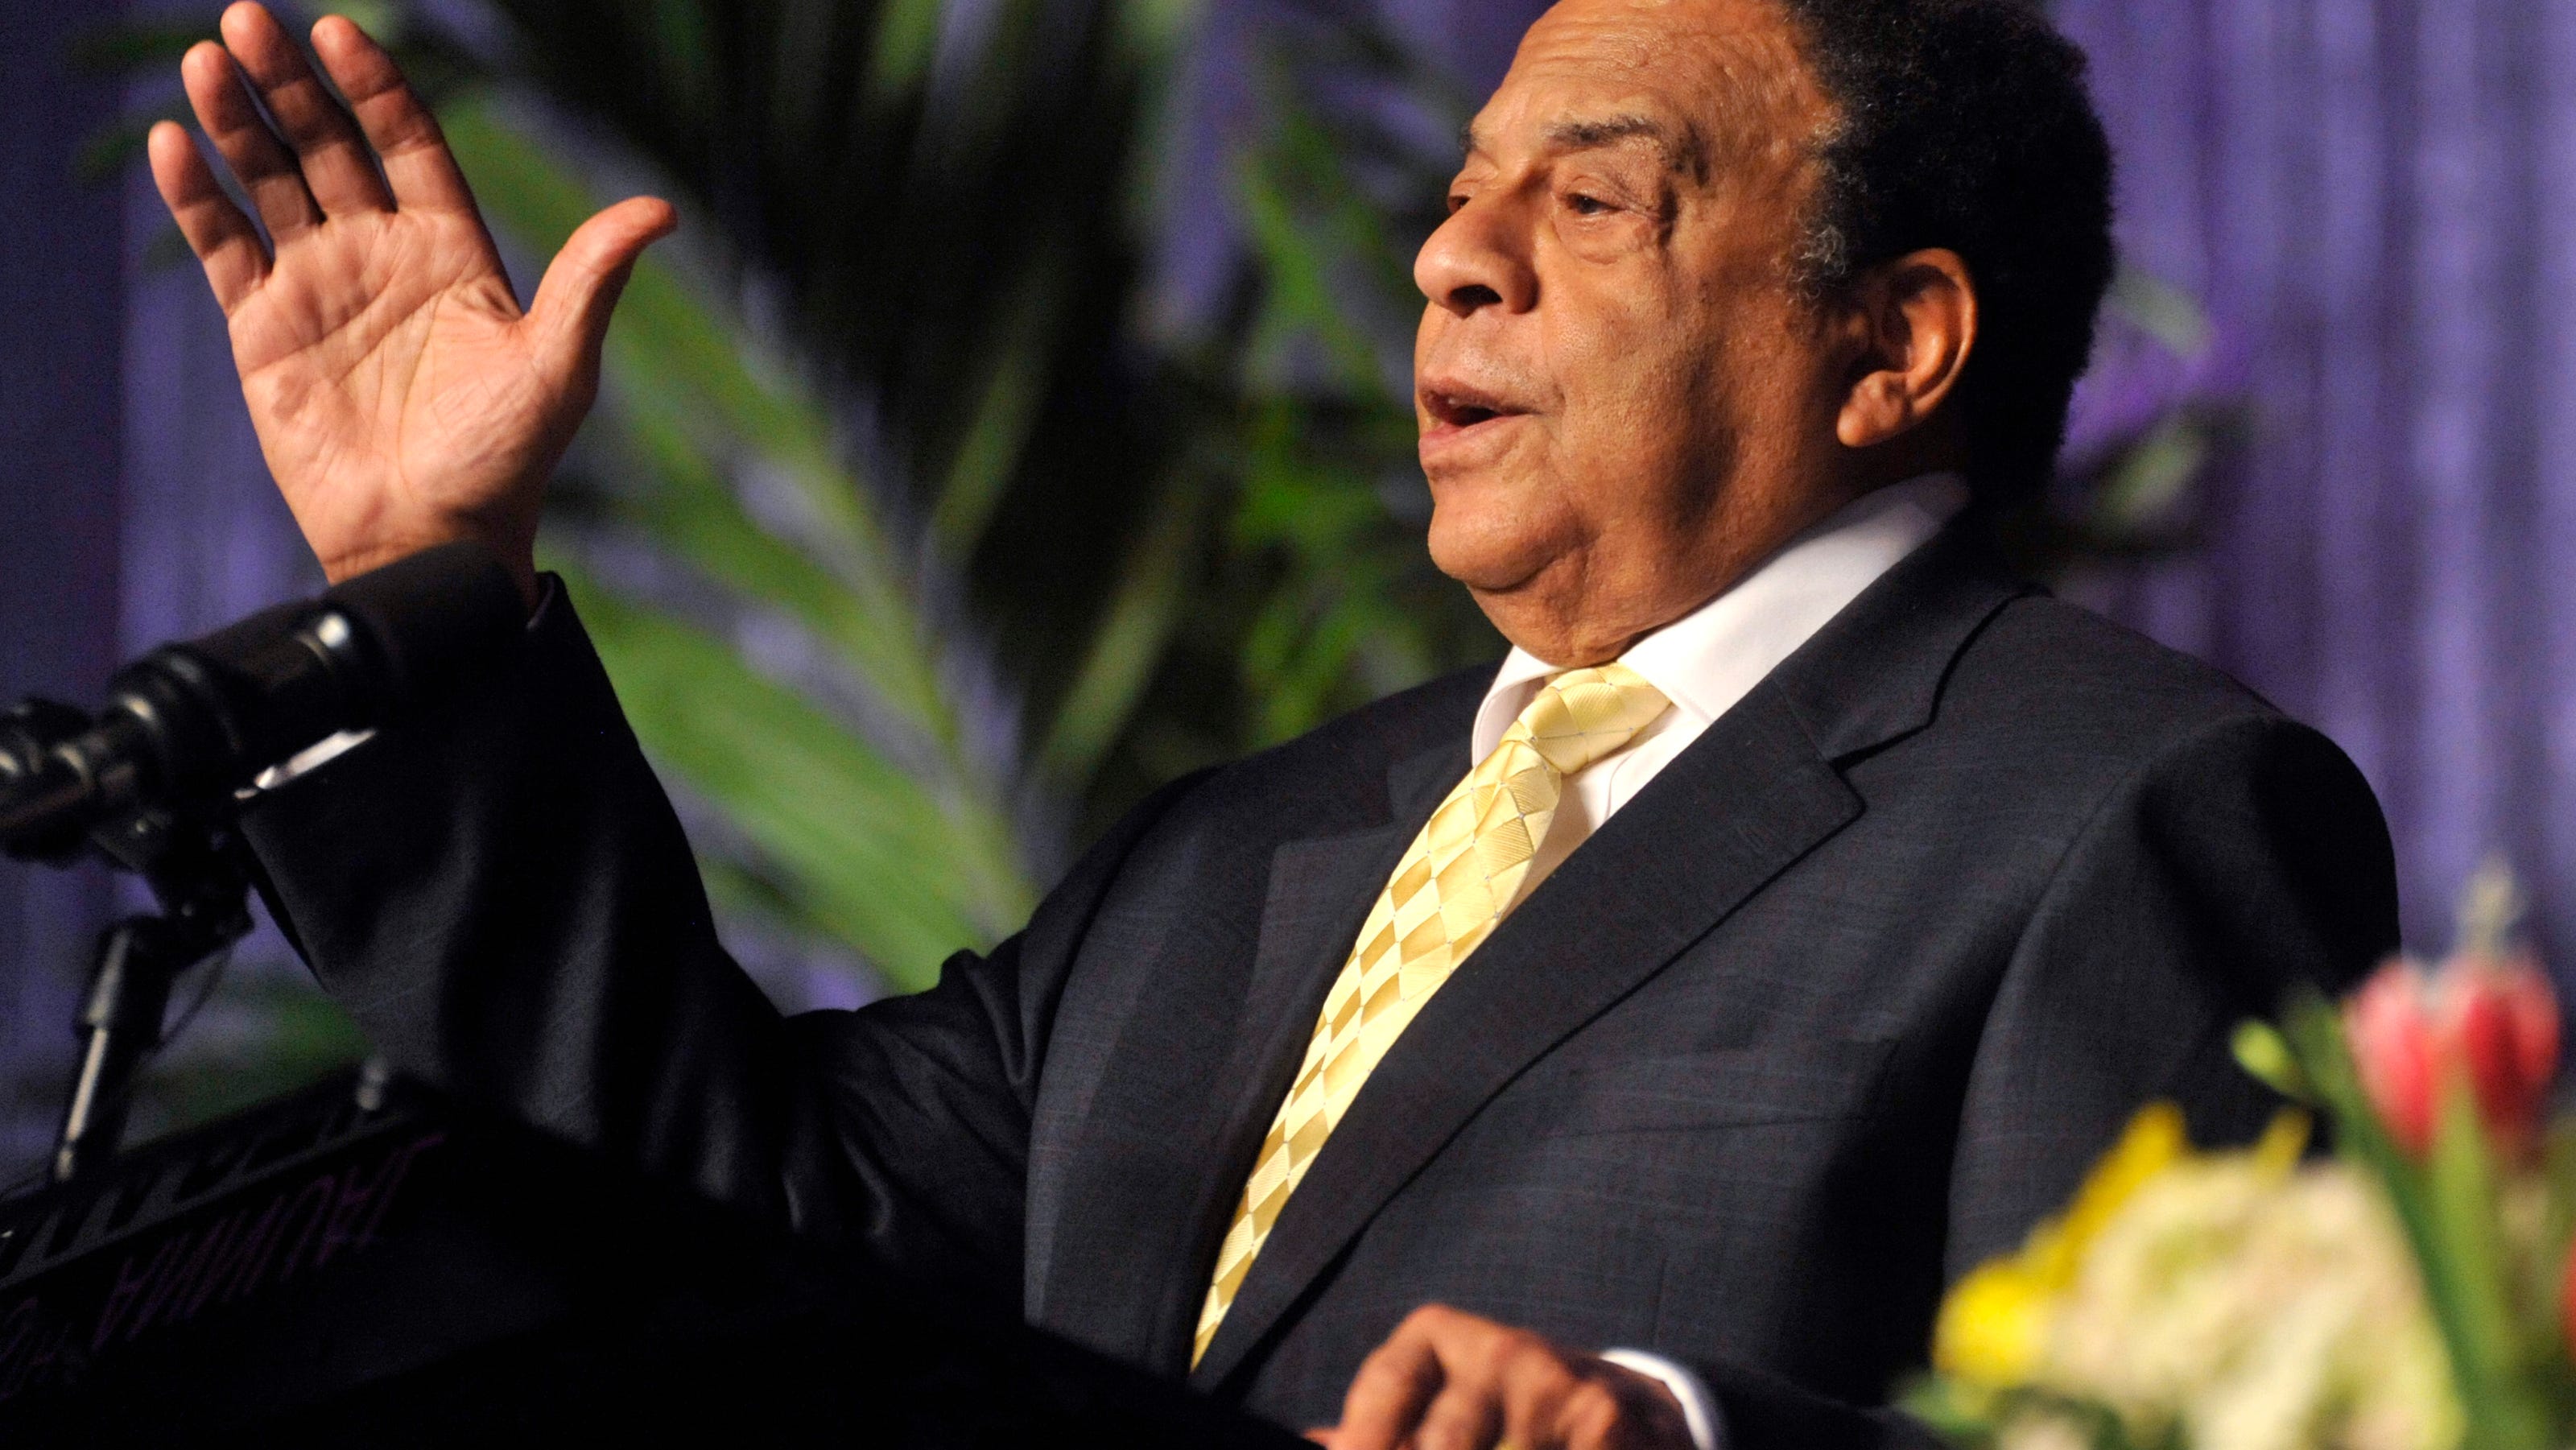  Kansas Bar Association to celebrate civil rights in Topeka with Andrew Young appearance 